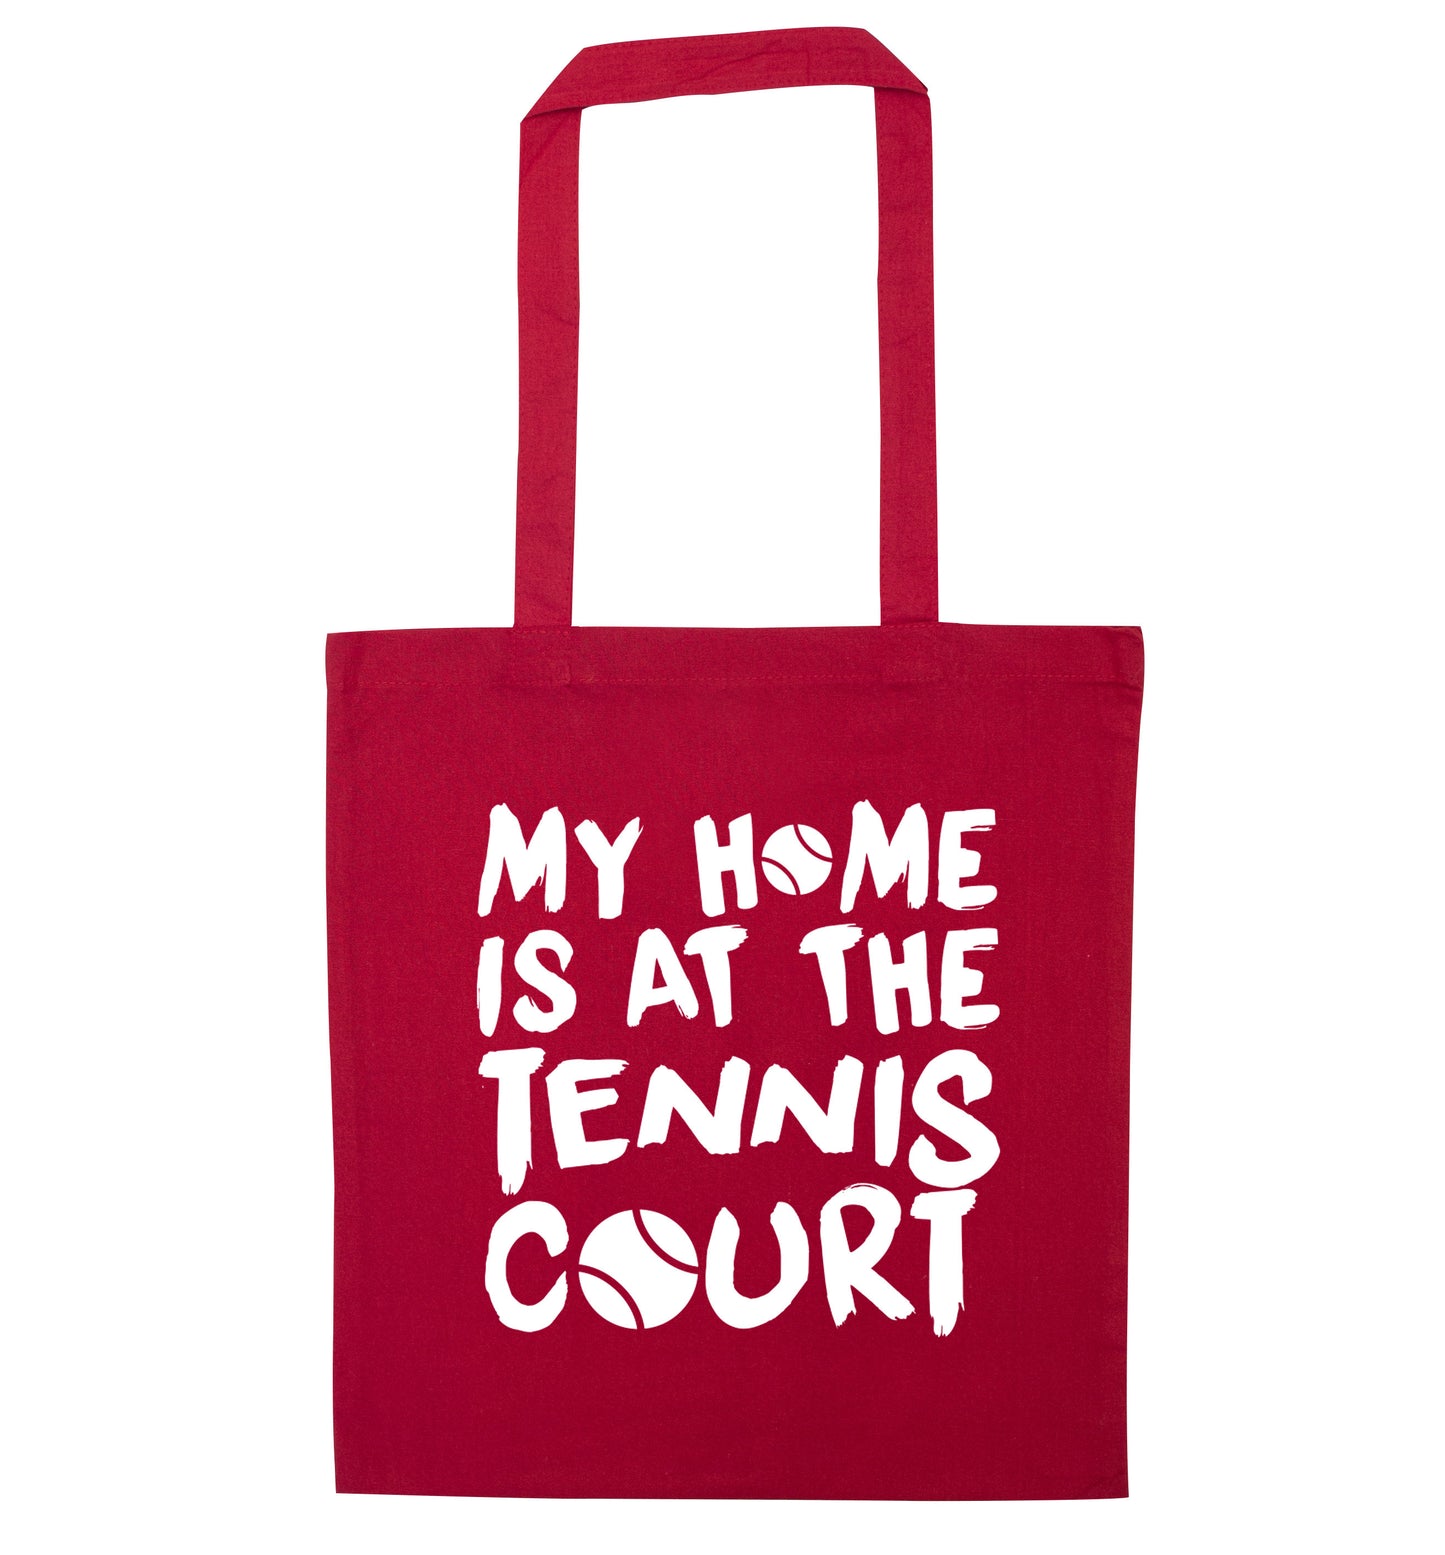 My home is at the tennis court red tote bag